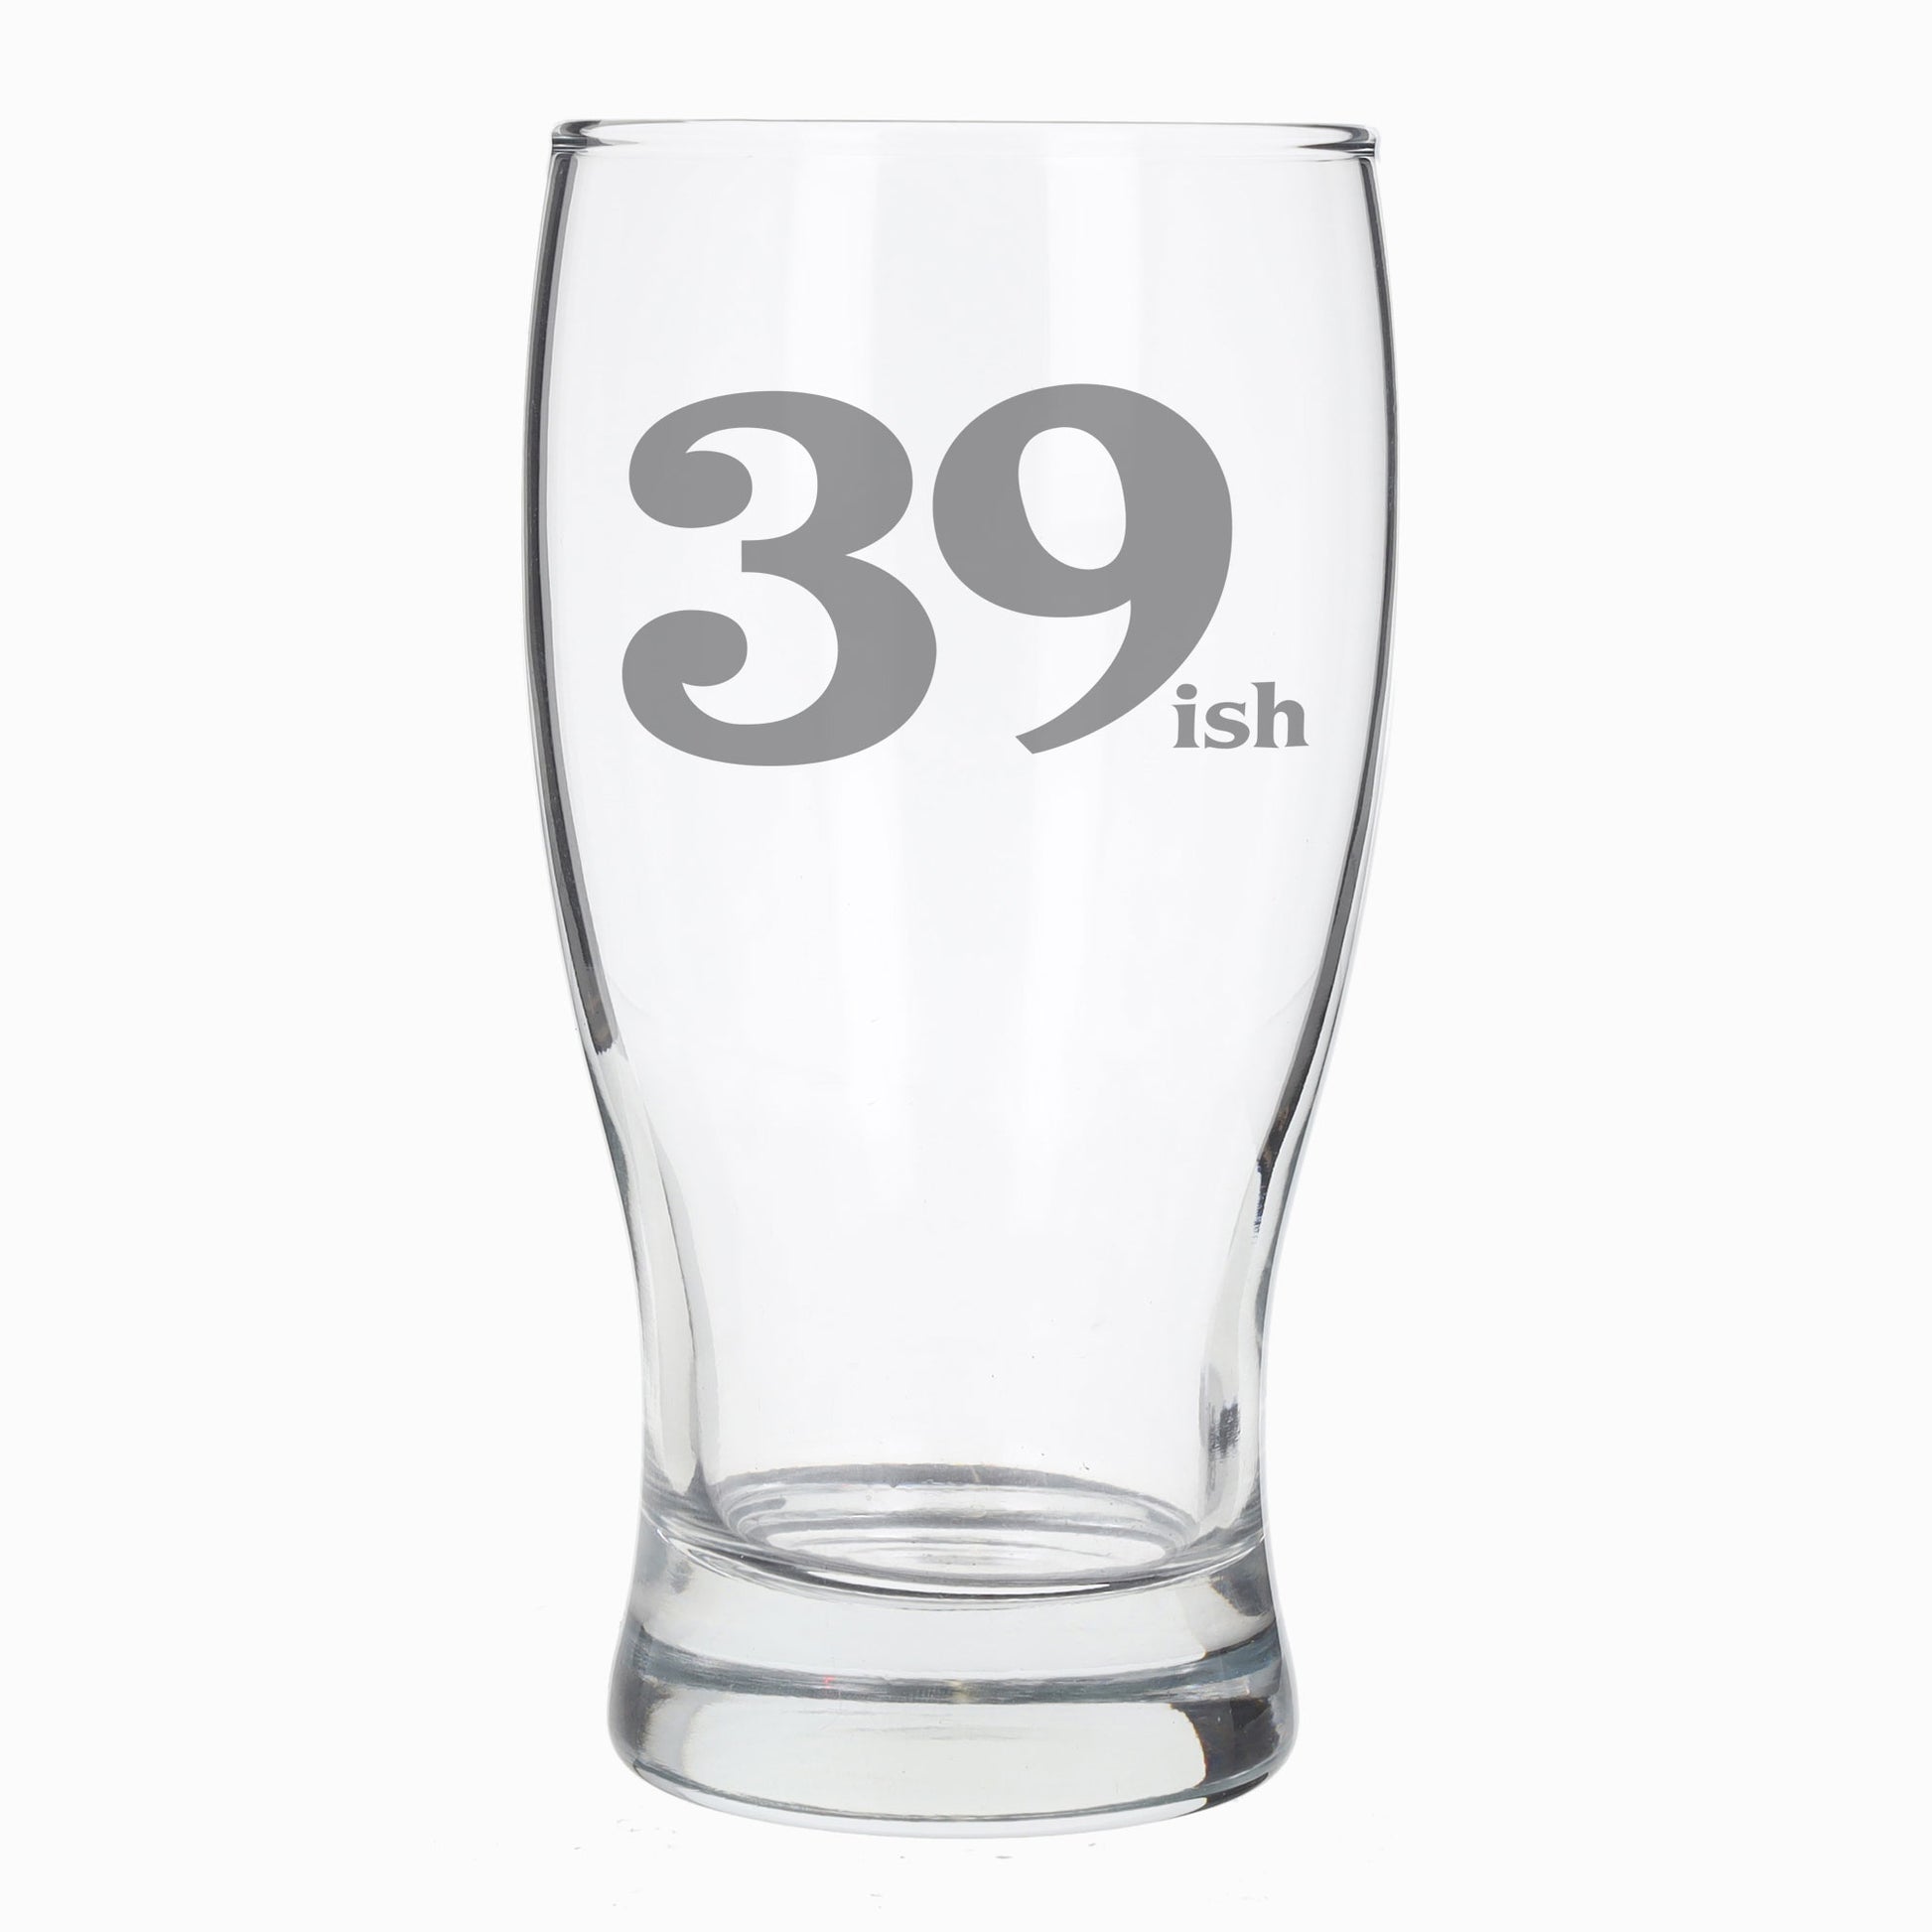 39ish Pint Glass and/or Coaster Set  - Always Looking Good - Pint Glass On Its Own  